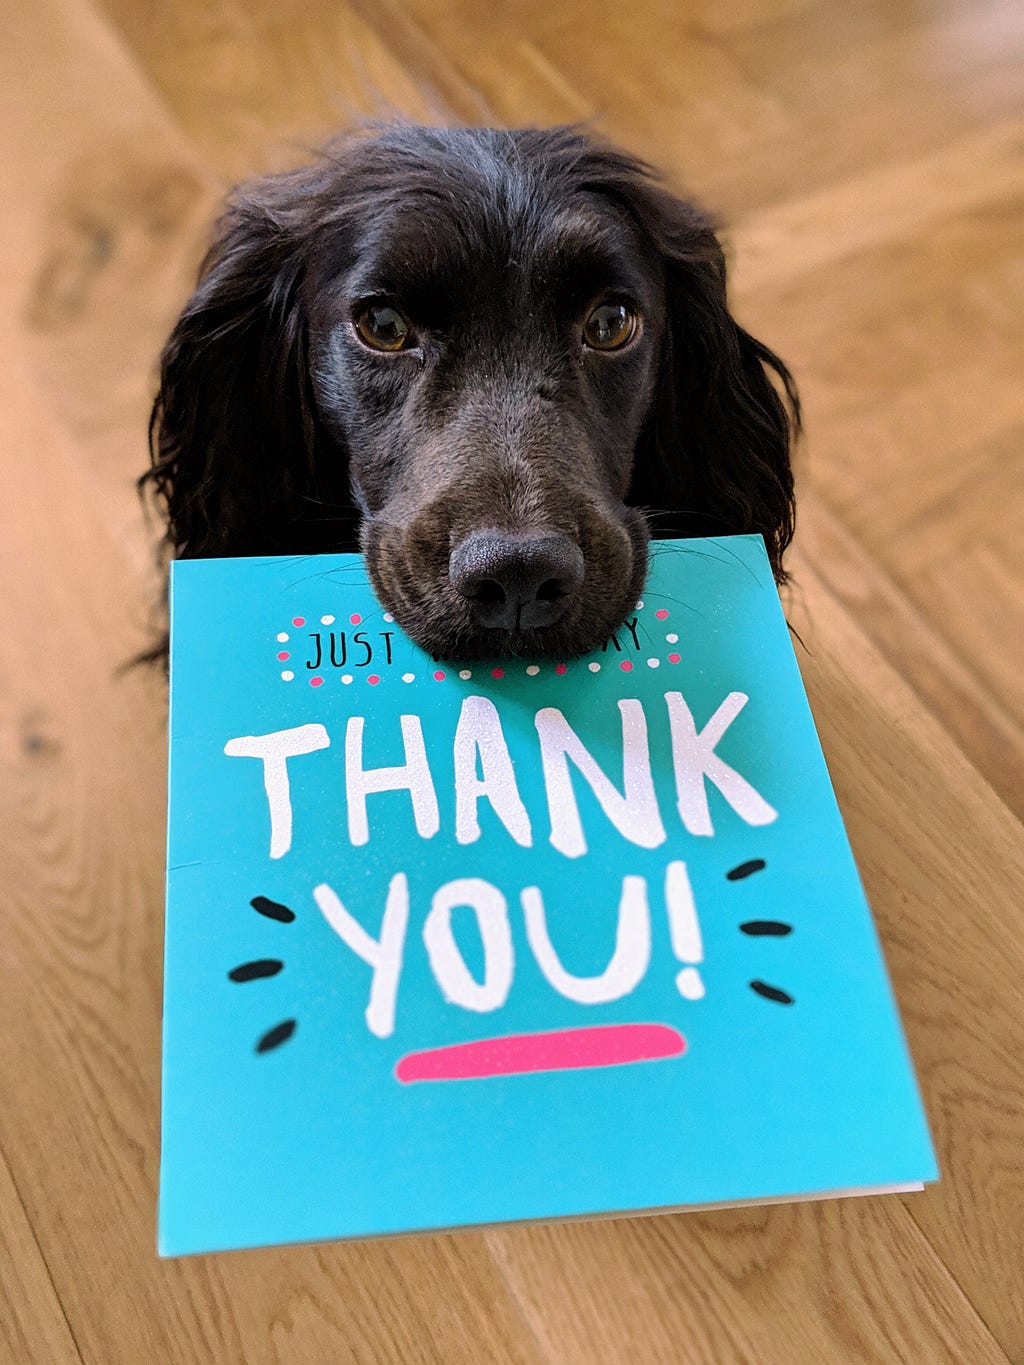 Black dog with long ears holding a blue greeting card in his mouth that has the words “Thank you!” in white acryclic paint.